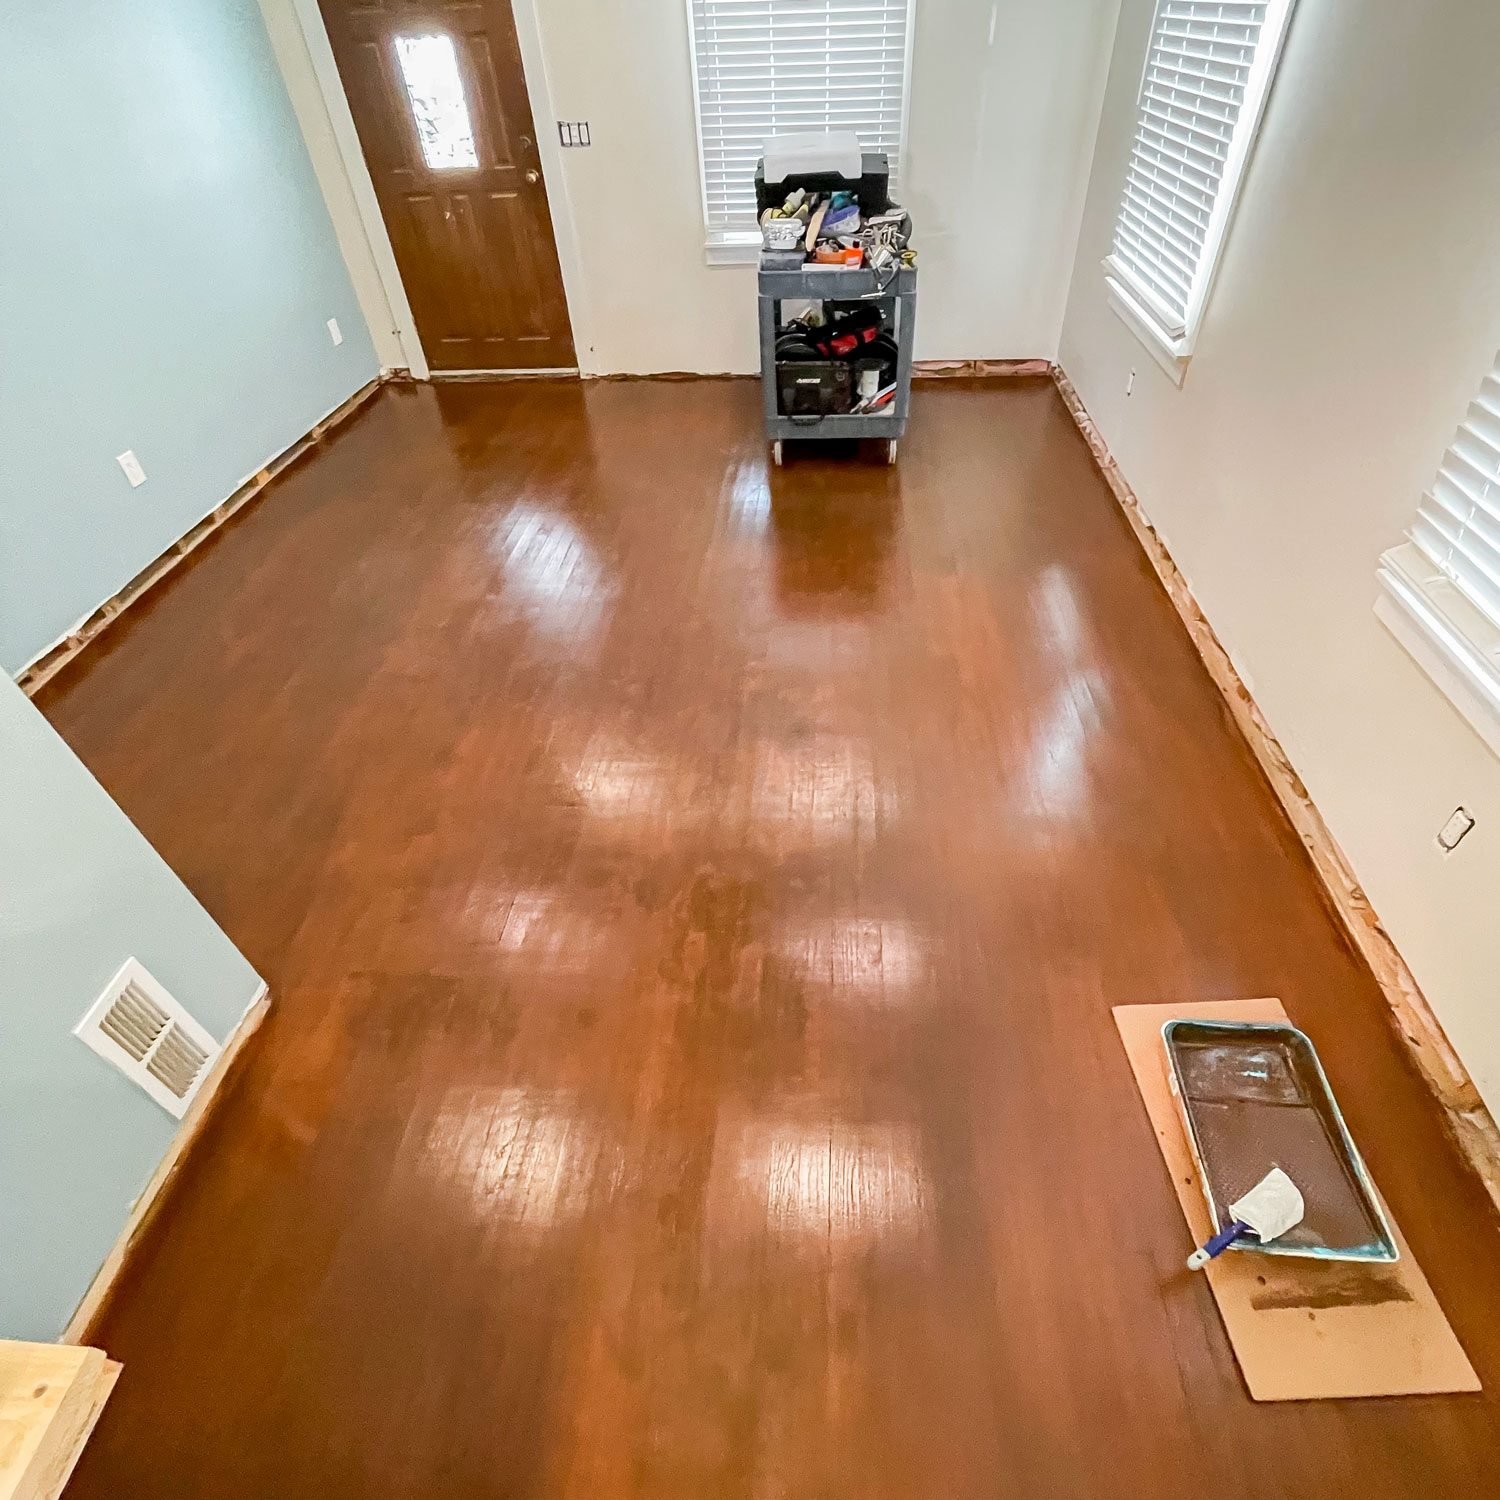 How To Save a Pet-Stained Hardwood Floor